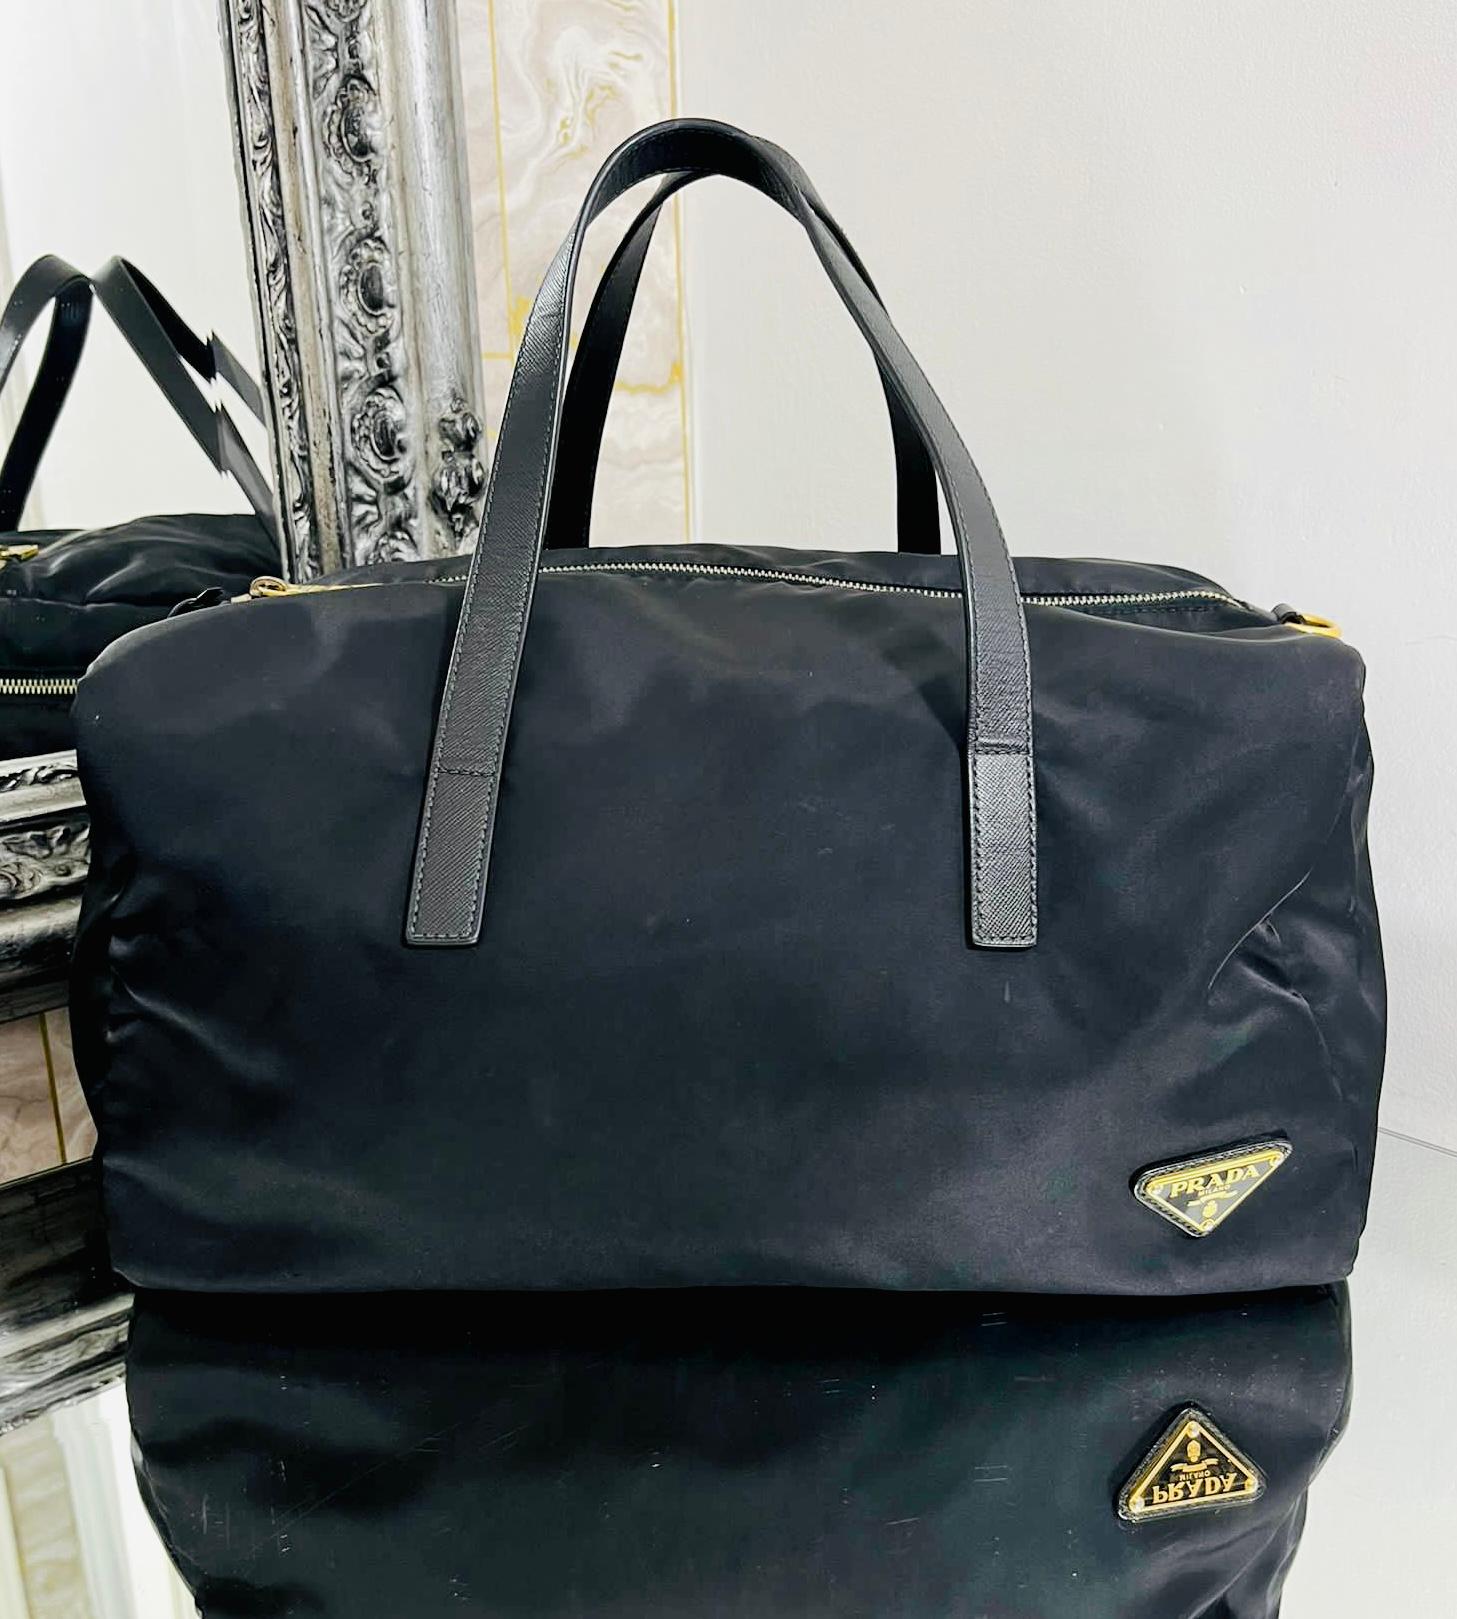 Prada Tessuto Boston Bag

Black duffle style handbag detailed with 'Prada' logo plaque to the side.

Featuring dual leather handles and top zip closure.

Designed with spacious interior with zipped pocket.

Size – Height 29cm, Width 35cm, Depth